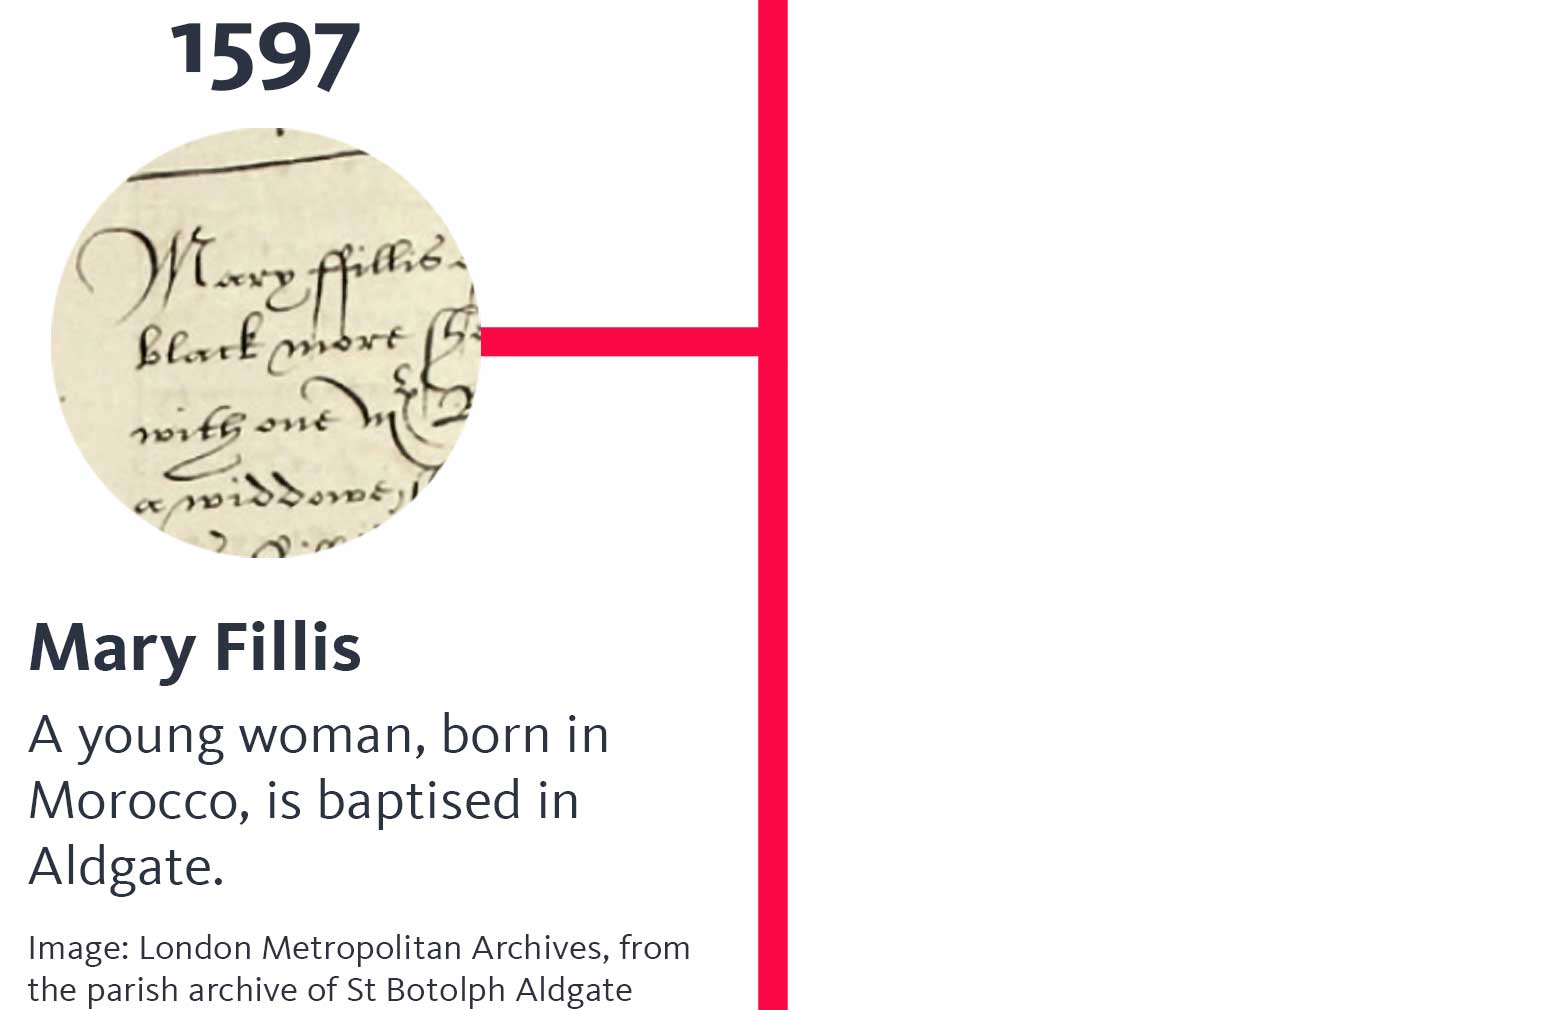 The year '1597' appears above an image of a handwritten old document. A heading below says 'Mary Fillis', and text below that says 'A young woman, born in Morocco, is baptised in Aldgate', and 'Image: St Botolph-without-Aldgate'.